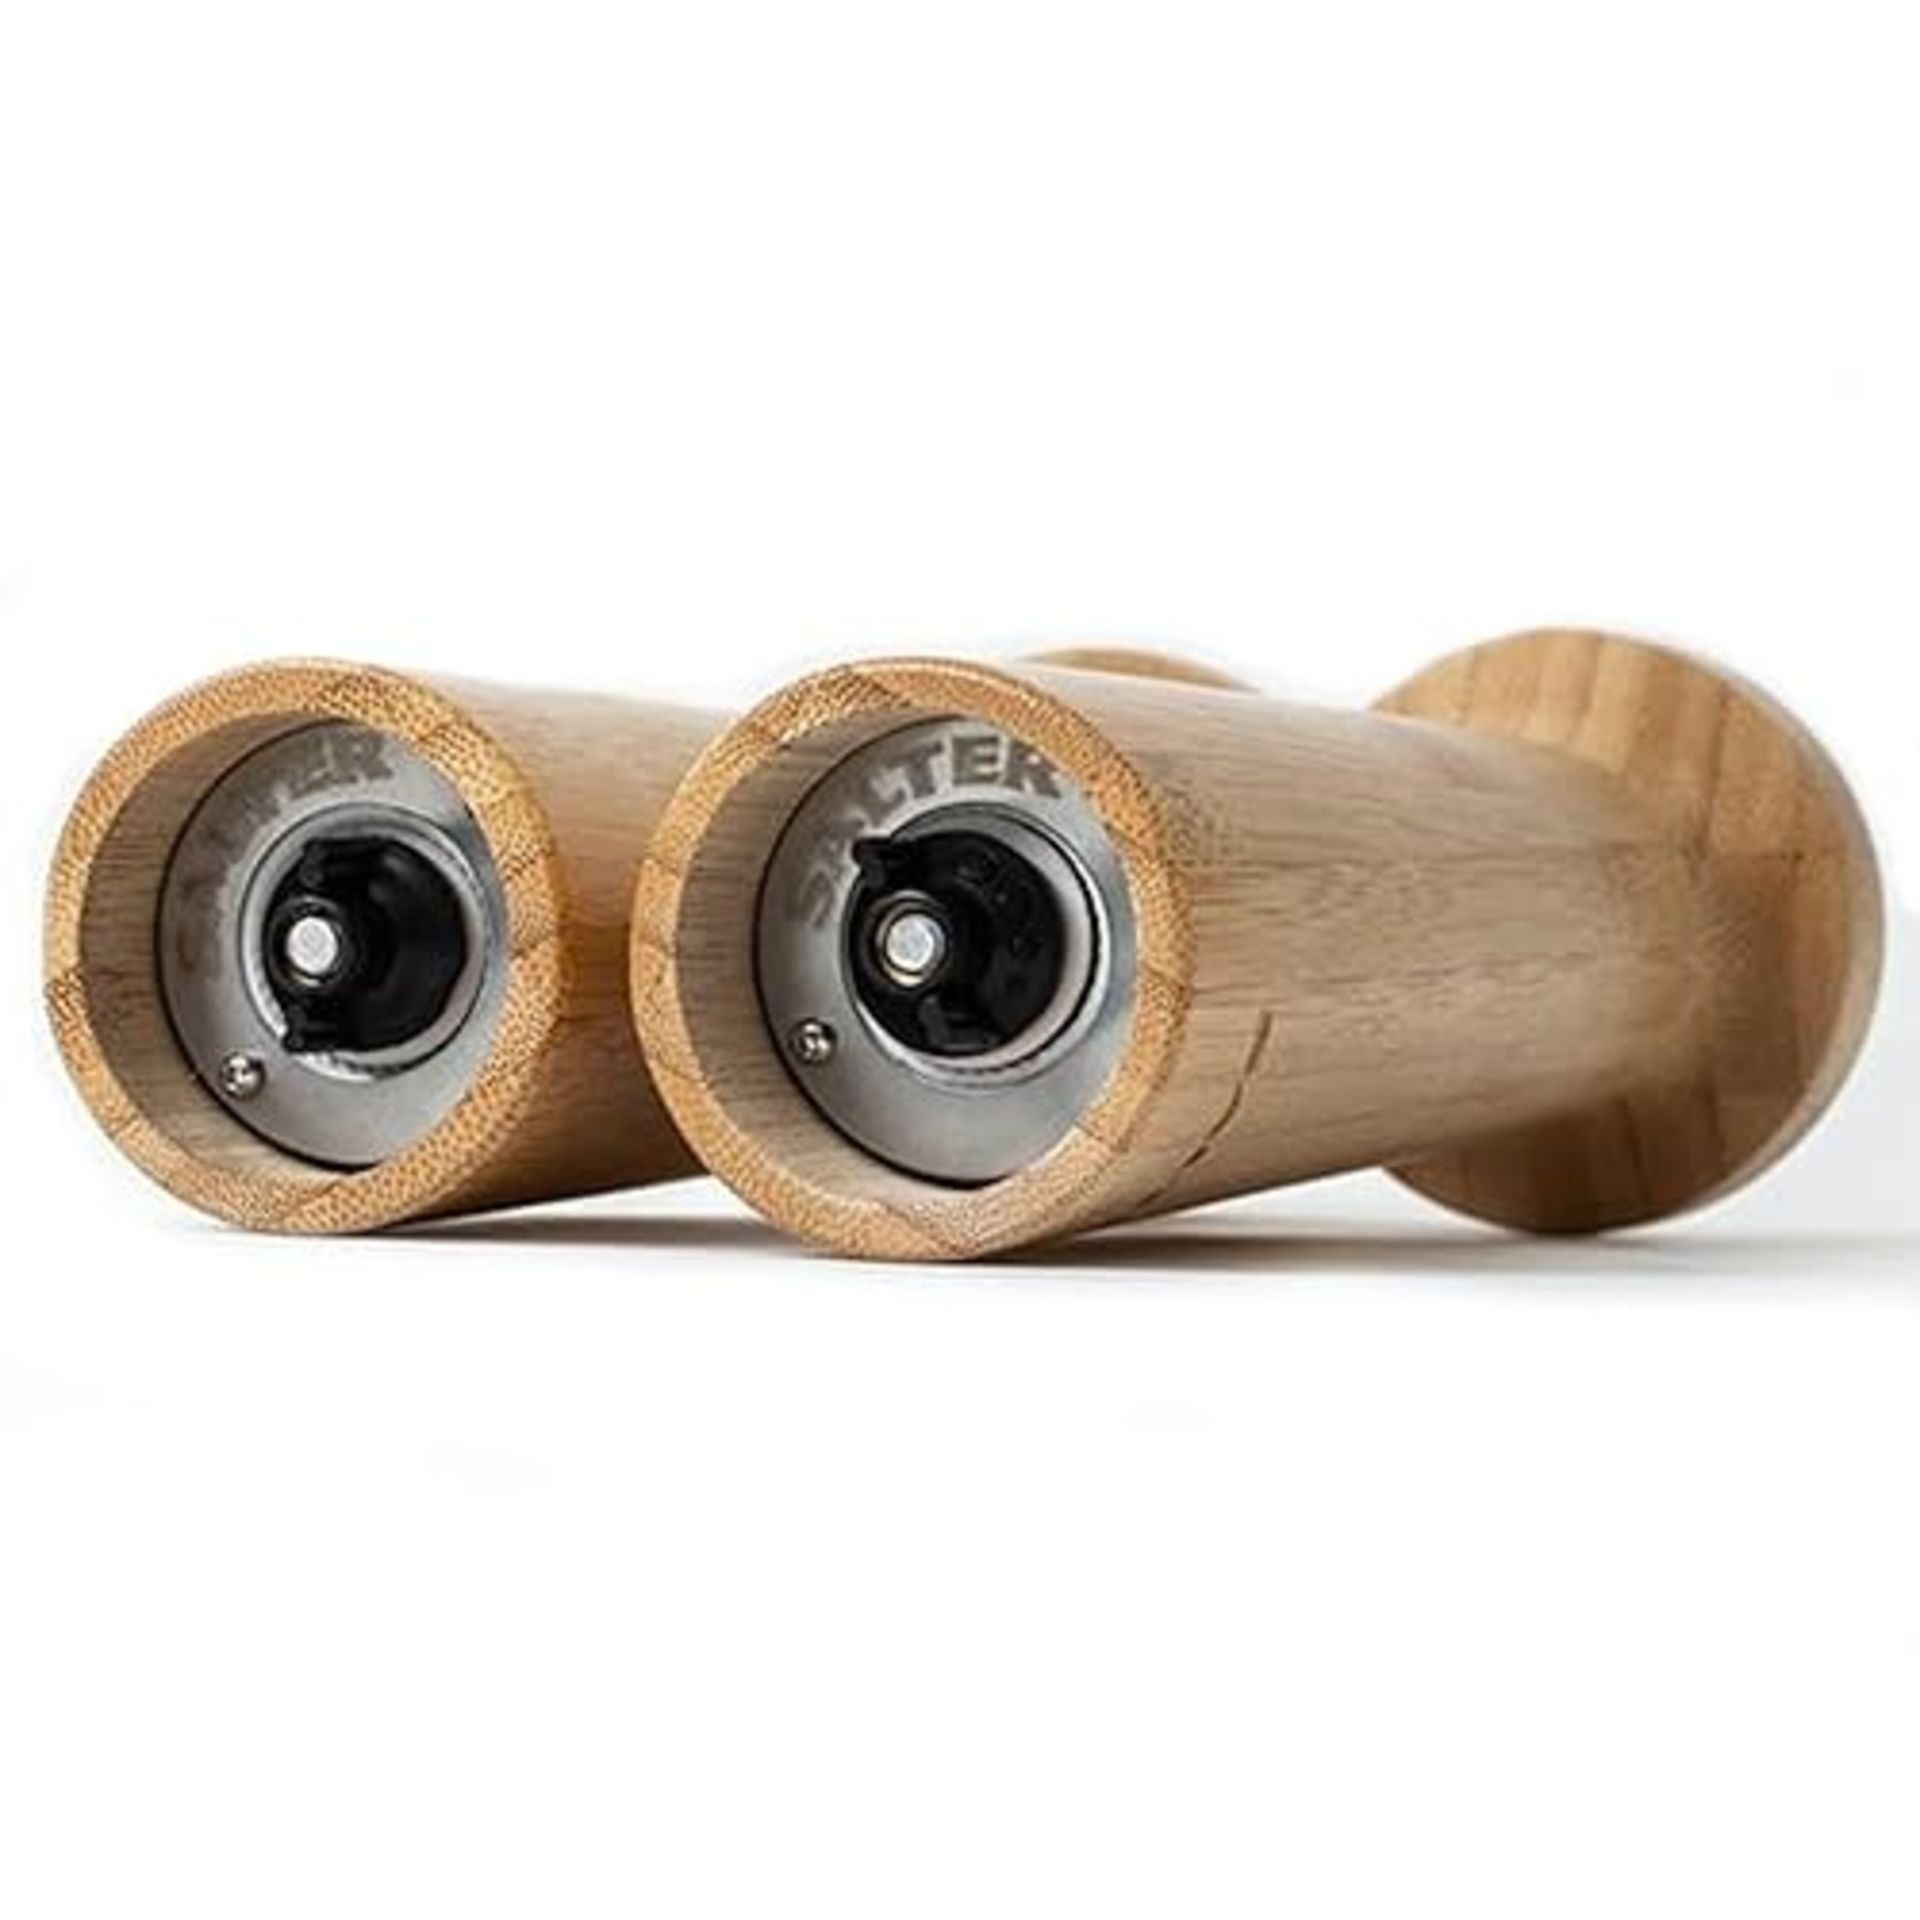 Salter 7614 WDXR Eco Bamboo Salt & Pepper Grinder Set - Solid Bamboo Mills With Stand, Manual Twi...